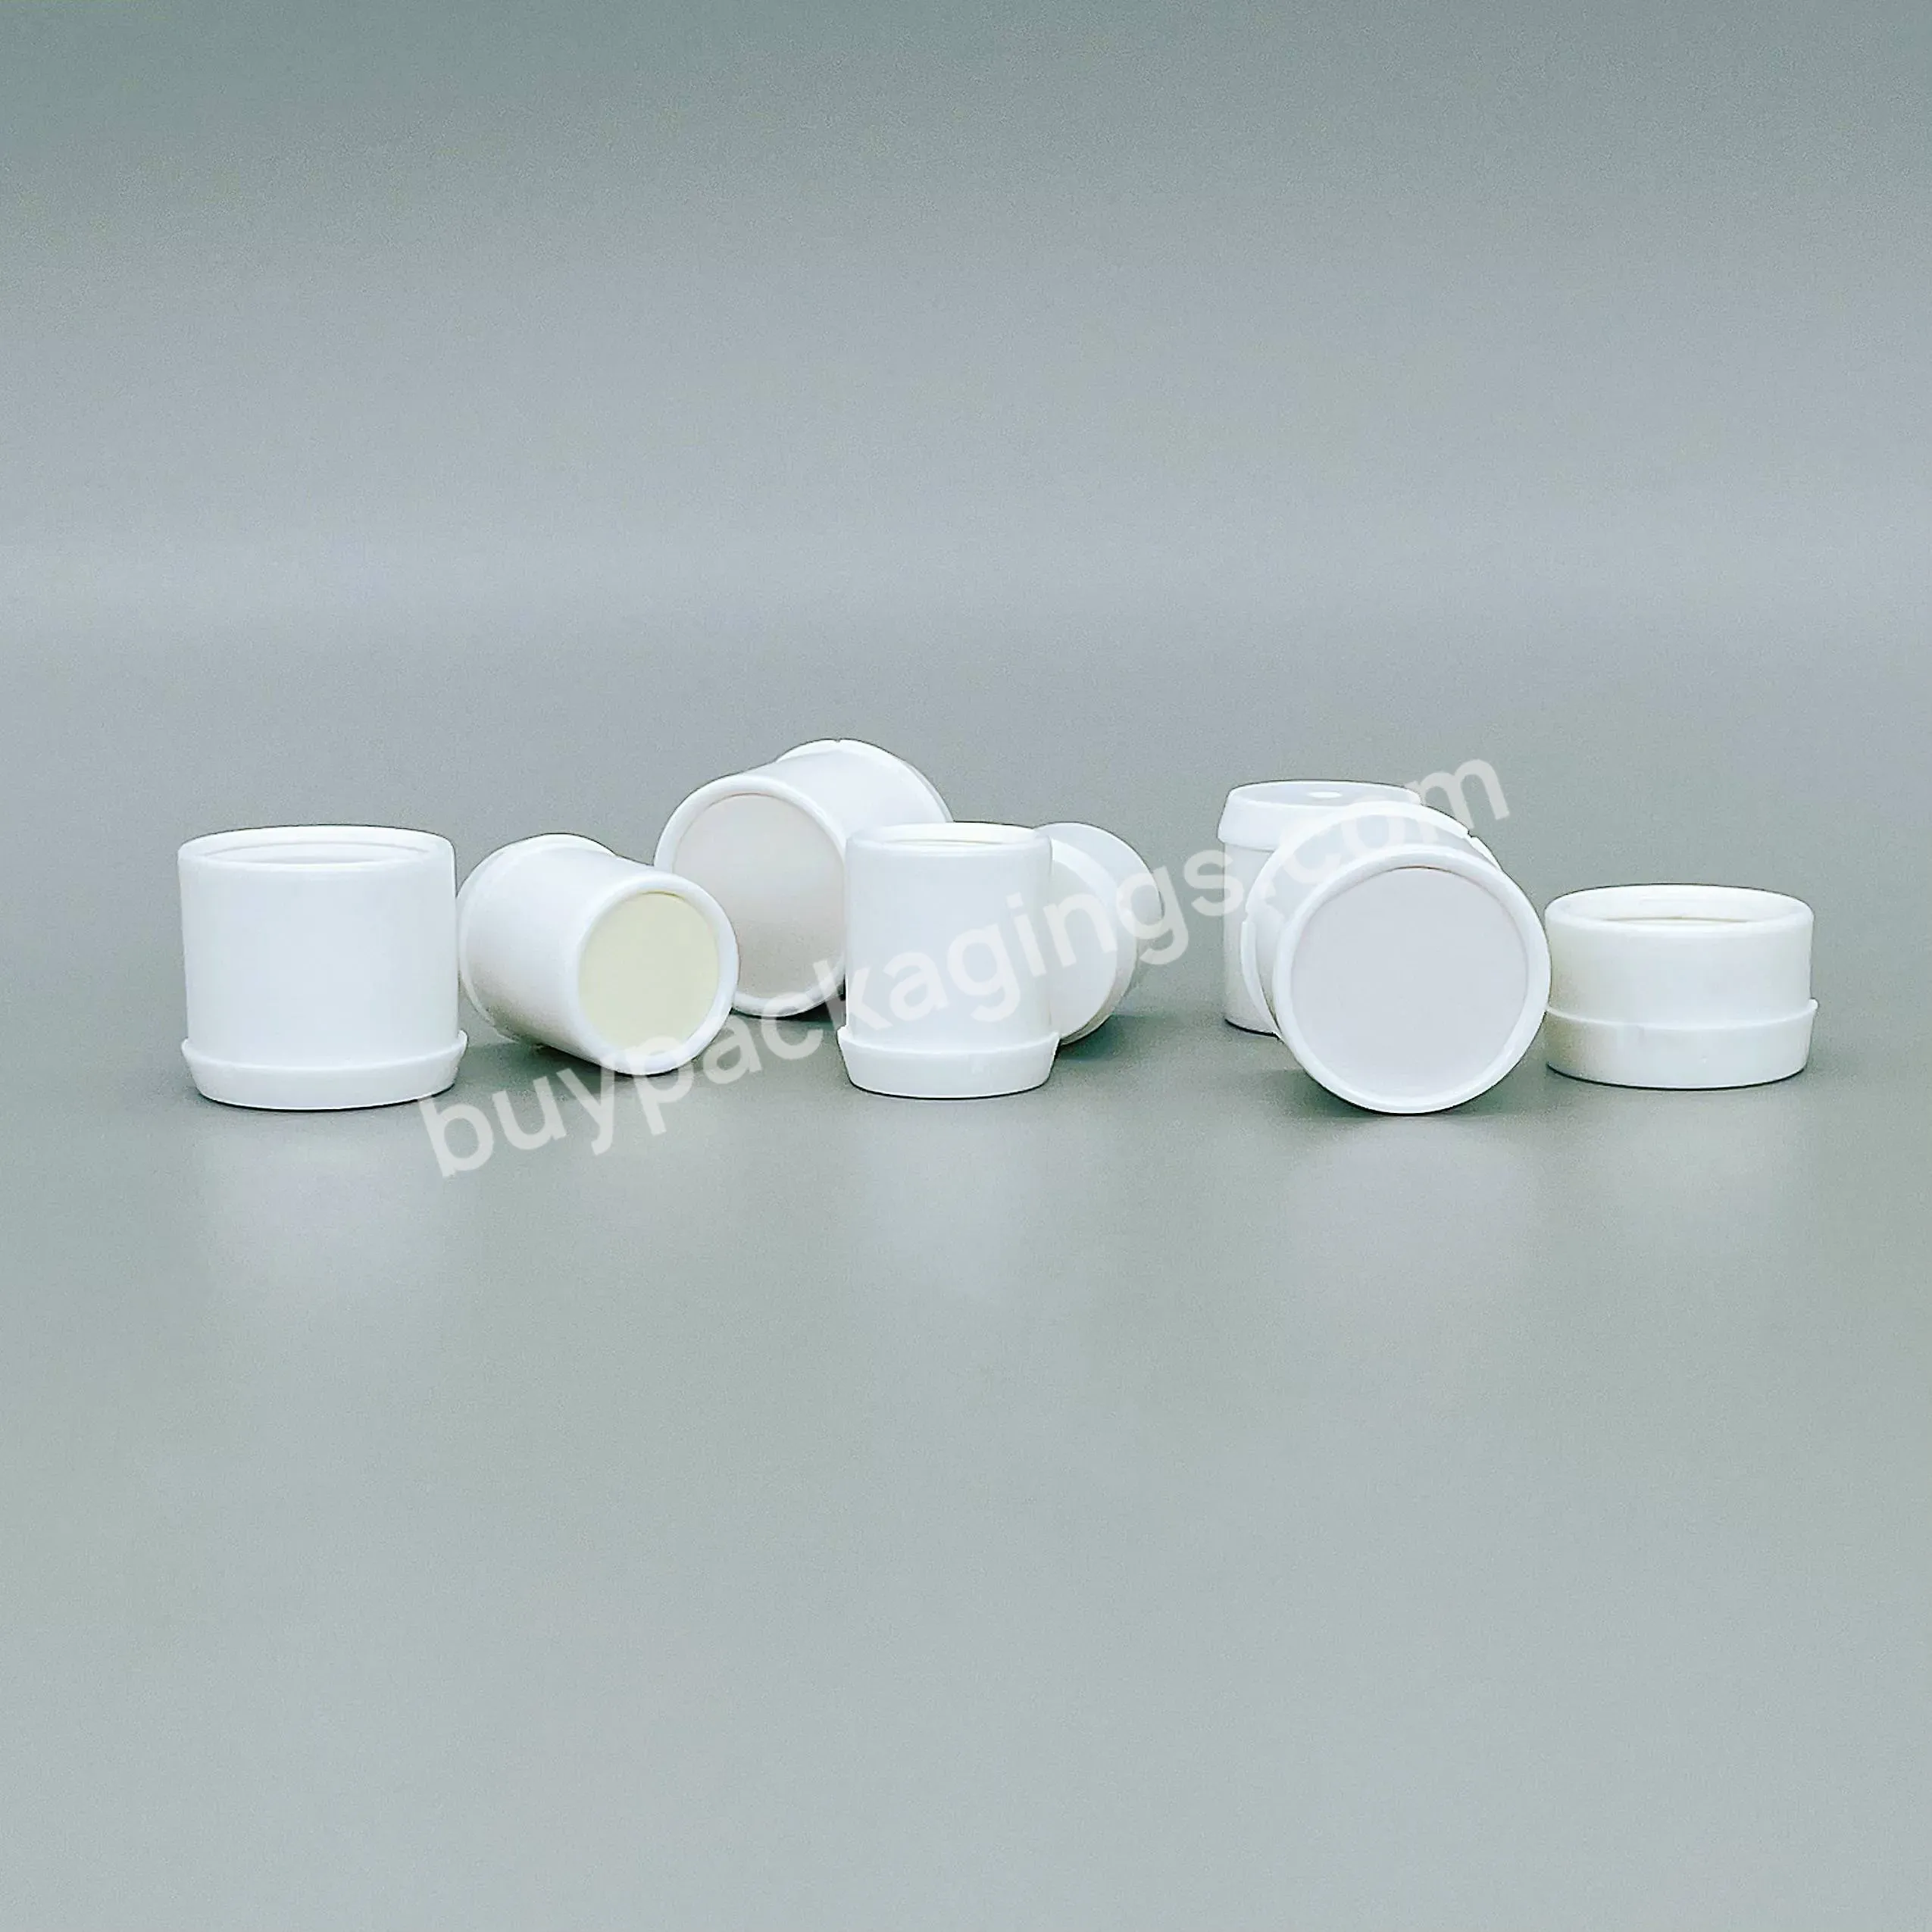 Health Food Sorbernt Desiccant Cover Silica Gel Desiccant Lid For Complementary Pharmacy Capsule And Tablets Moisture Absorbing - Buy Silica Gel Desiccant Covers,Pharmacy Capsule Desiccant,Silica Gel Desiccant Canister.